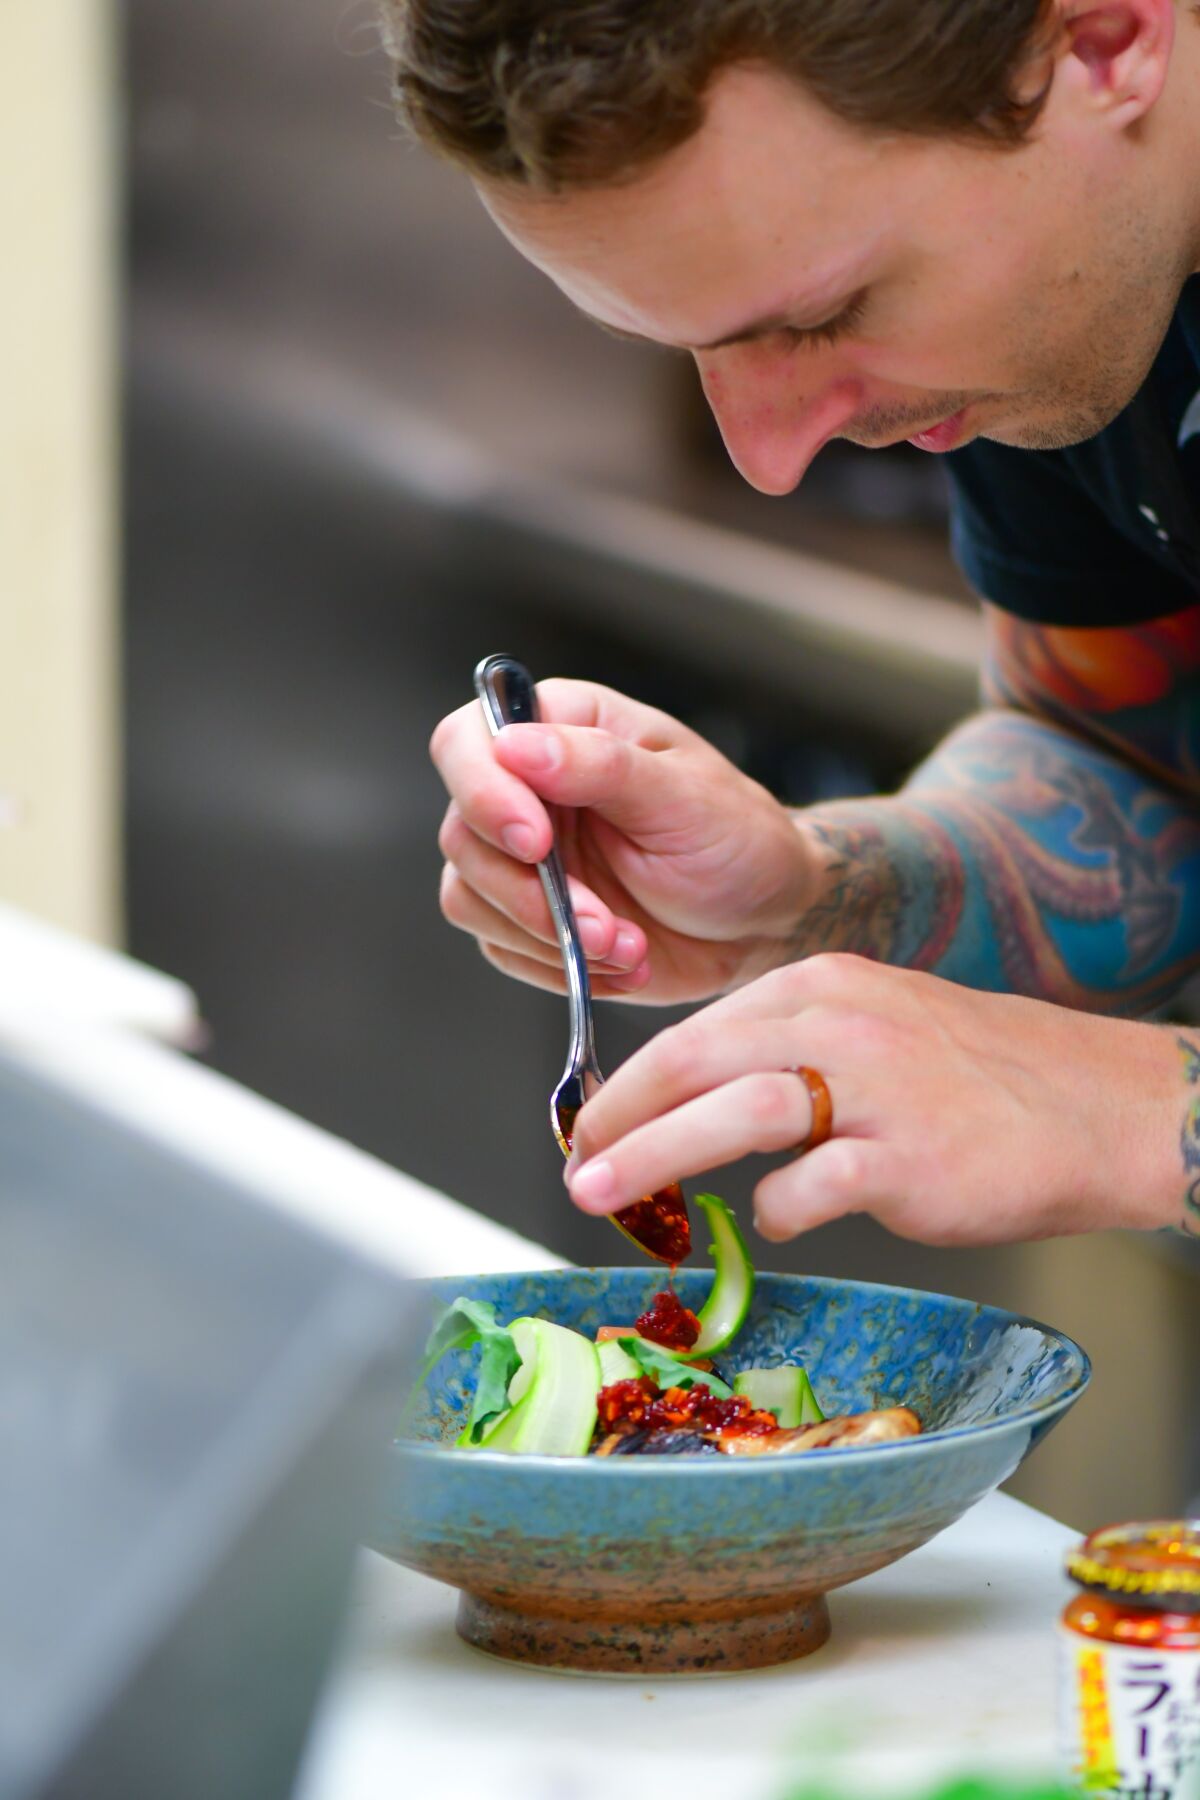 Chef William Eick plates a dish for his now-in-development Japanese-inspired restaurant Matsu, which he's fine-tuning by serving a Matsu tasting menu dinner for just one table three nights a week at Mission Ave Bar and Grill in Oceanside, where he serves as executive chef.